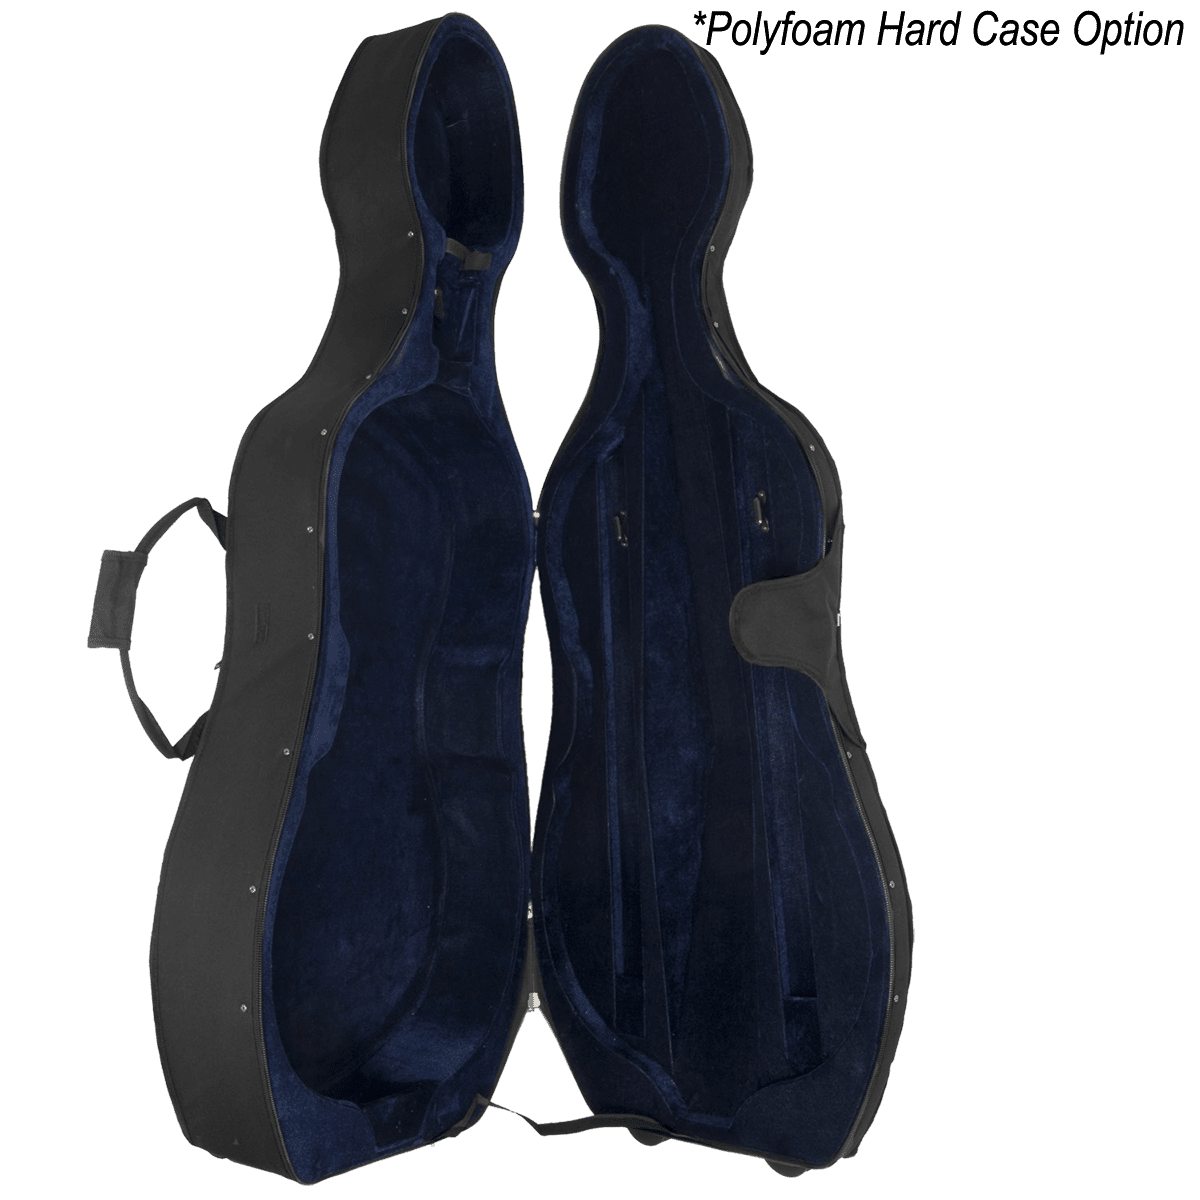 Vivo Student 4/4 Cello Outfit with Bag